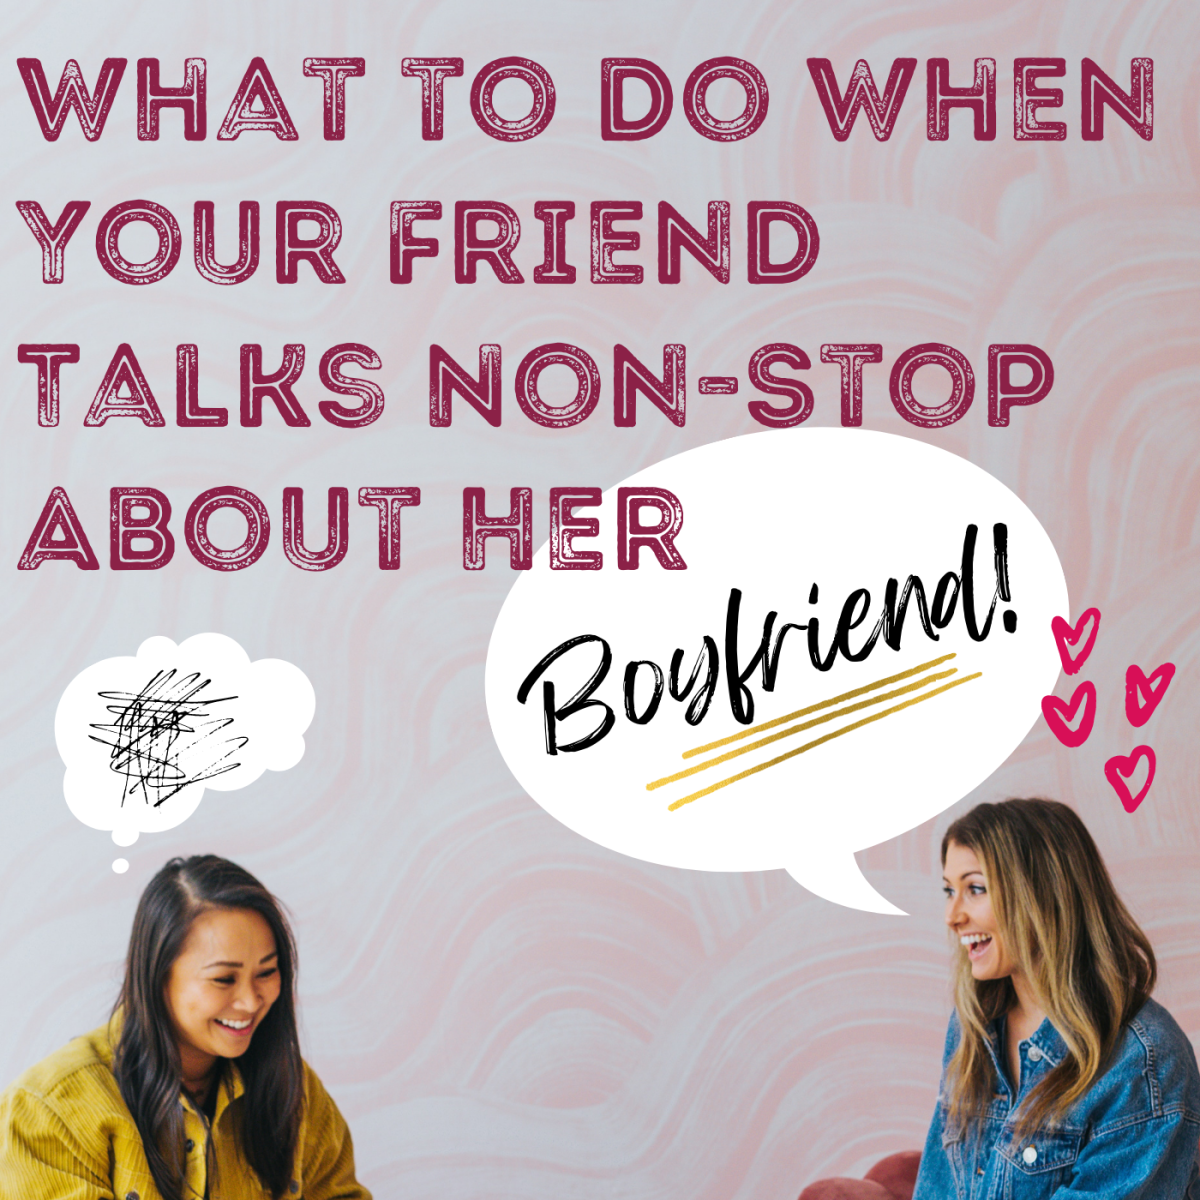 You love your friend, but she just. Won't. Stop. Talking. About. HIM!